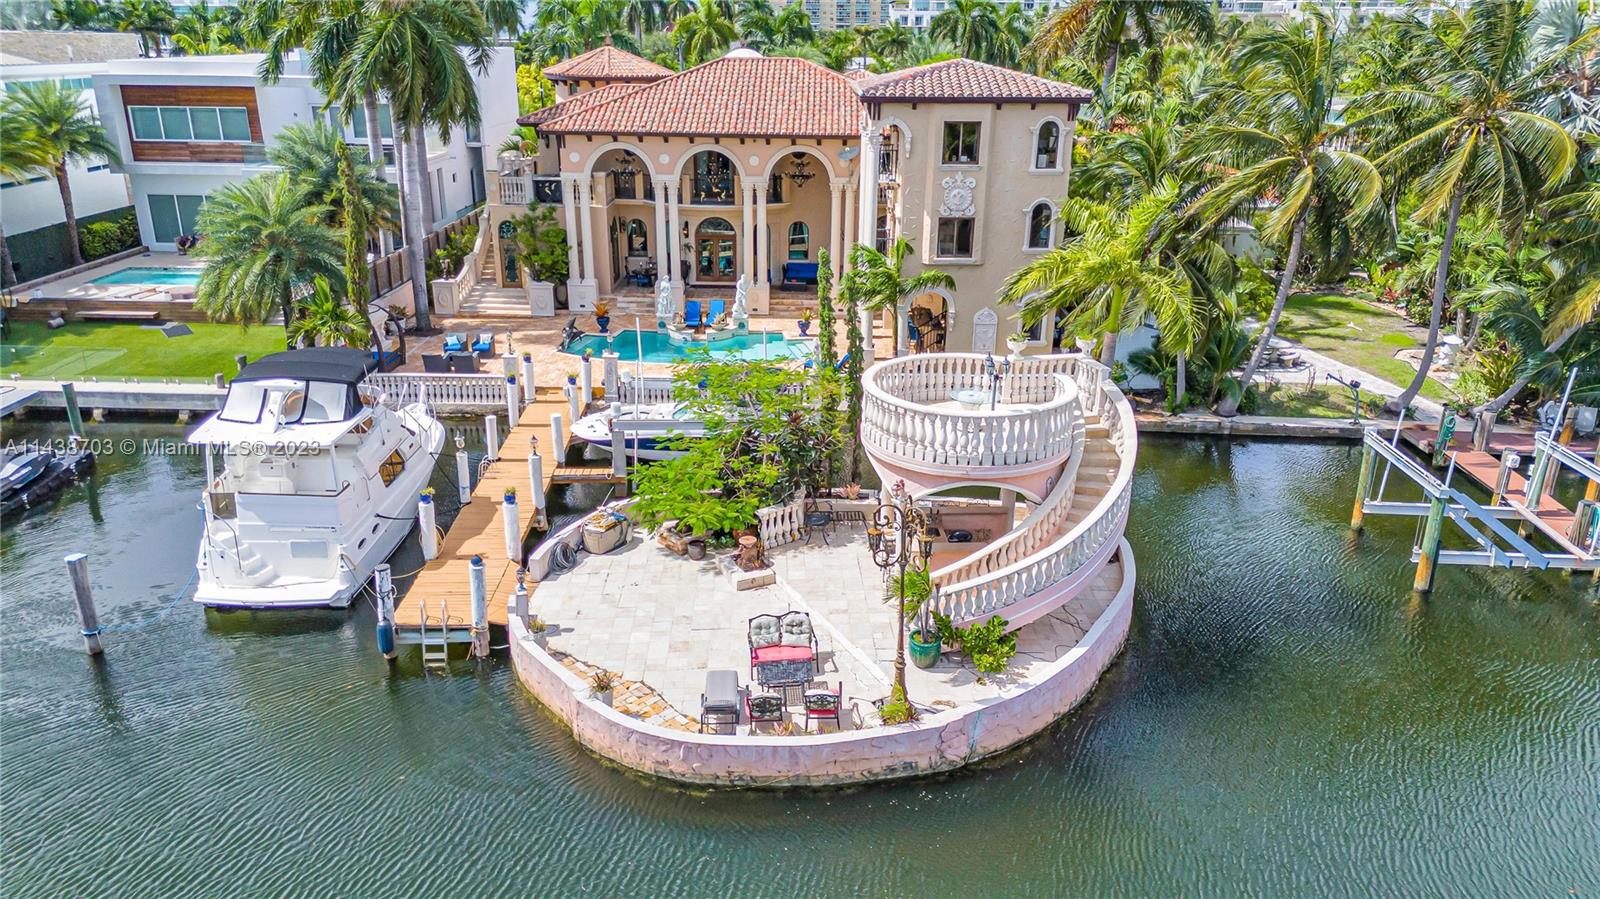 One of a kind Mediterranean Oasis in the heart of Sunny Isles Beach. Custom built and expanded on by its current owner, Civil Engineer and Founding Father of Sunny Isles. Truly stunning waterfront estate situated on one of the largest parcel available in Sunny Isles Beach. Step off your boat onto your own private island or take a stroll to the neighborhoods private beach access. Featuring three separate independent dwellings, this estate offers accommodations for family, friends, and staff. 8420 Sq ft under air featuring 9 bedrooms, 5 of which with on suite accommodations, 8 full bathrooms, 2 half baths, 4 kitchens (3 indoor, 1 outdoor), and more! 1/1 Guest House, 2/2 + Den in law suite, and 6 bedrooms in the main. Property extends 65 feet beyond the sea wall providing additional dockage.